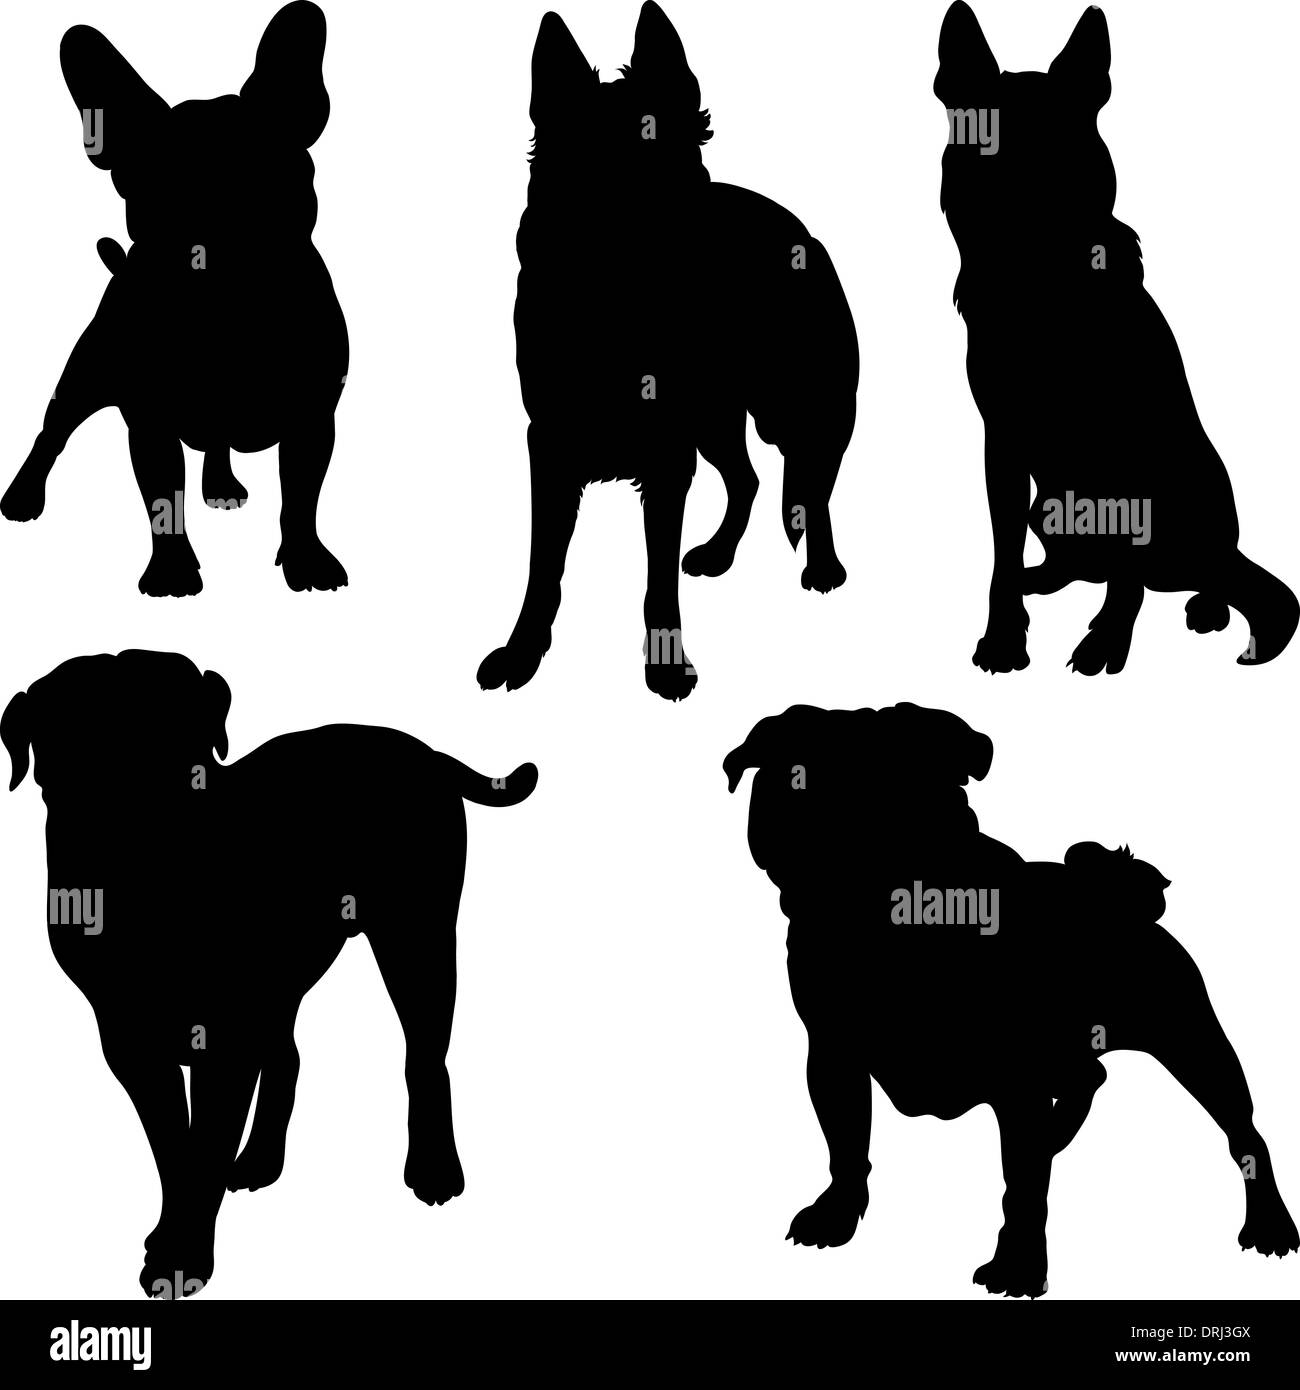 set of silhouettes of pug, French bulldog, Shepherd, bullmastiff breeds of dogs in various poses Stock Photo